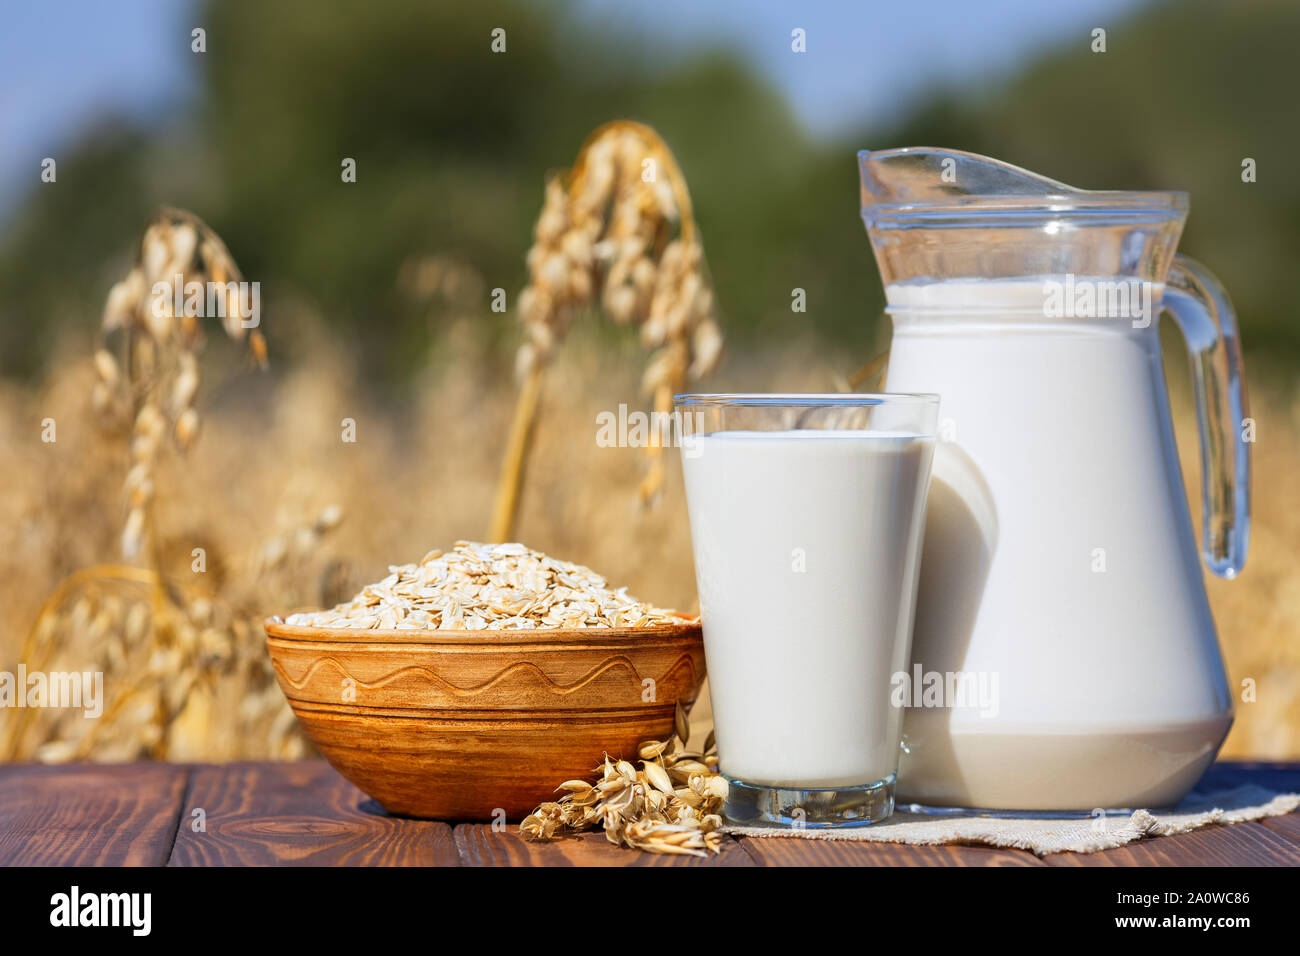 vegan oat milk in glass jug with uncooked oatmeal in bowl on table over against ripe cereal field Stock Photo